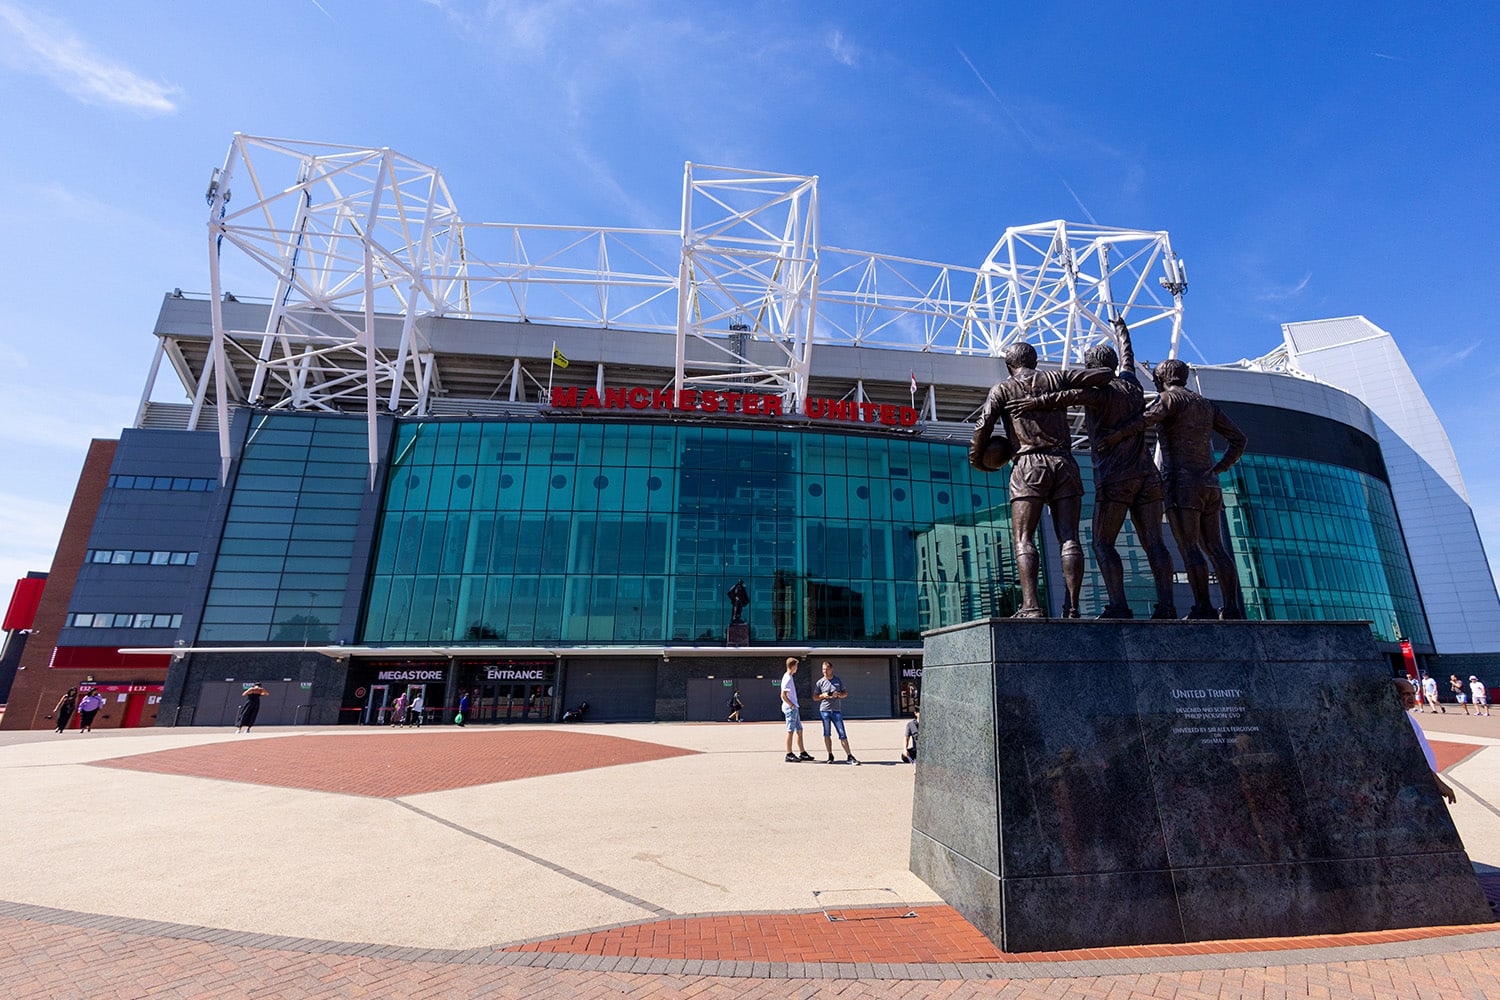 An exterior view of the entrance to Old Trafford, home of Manchester United FC.